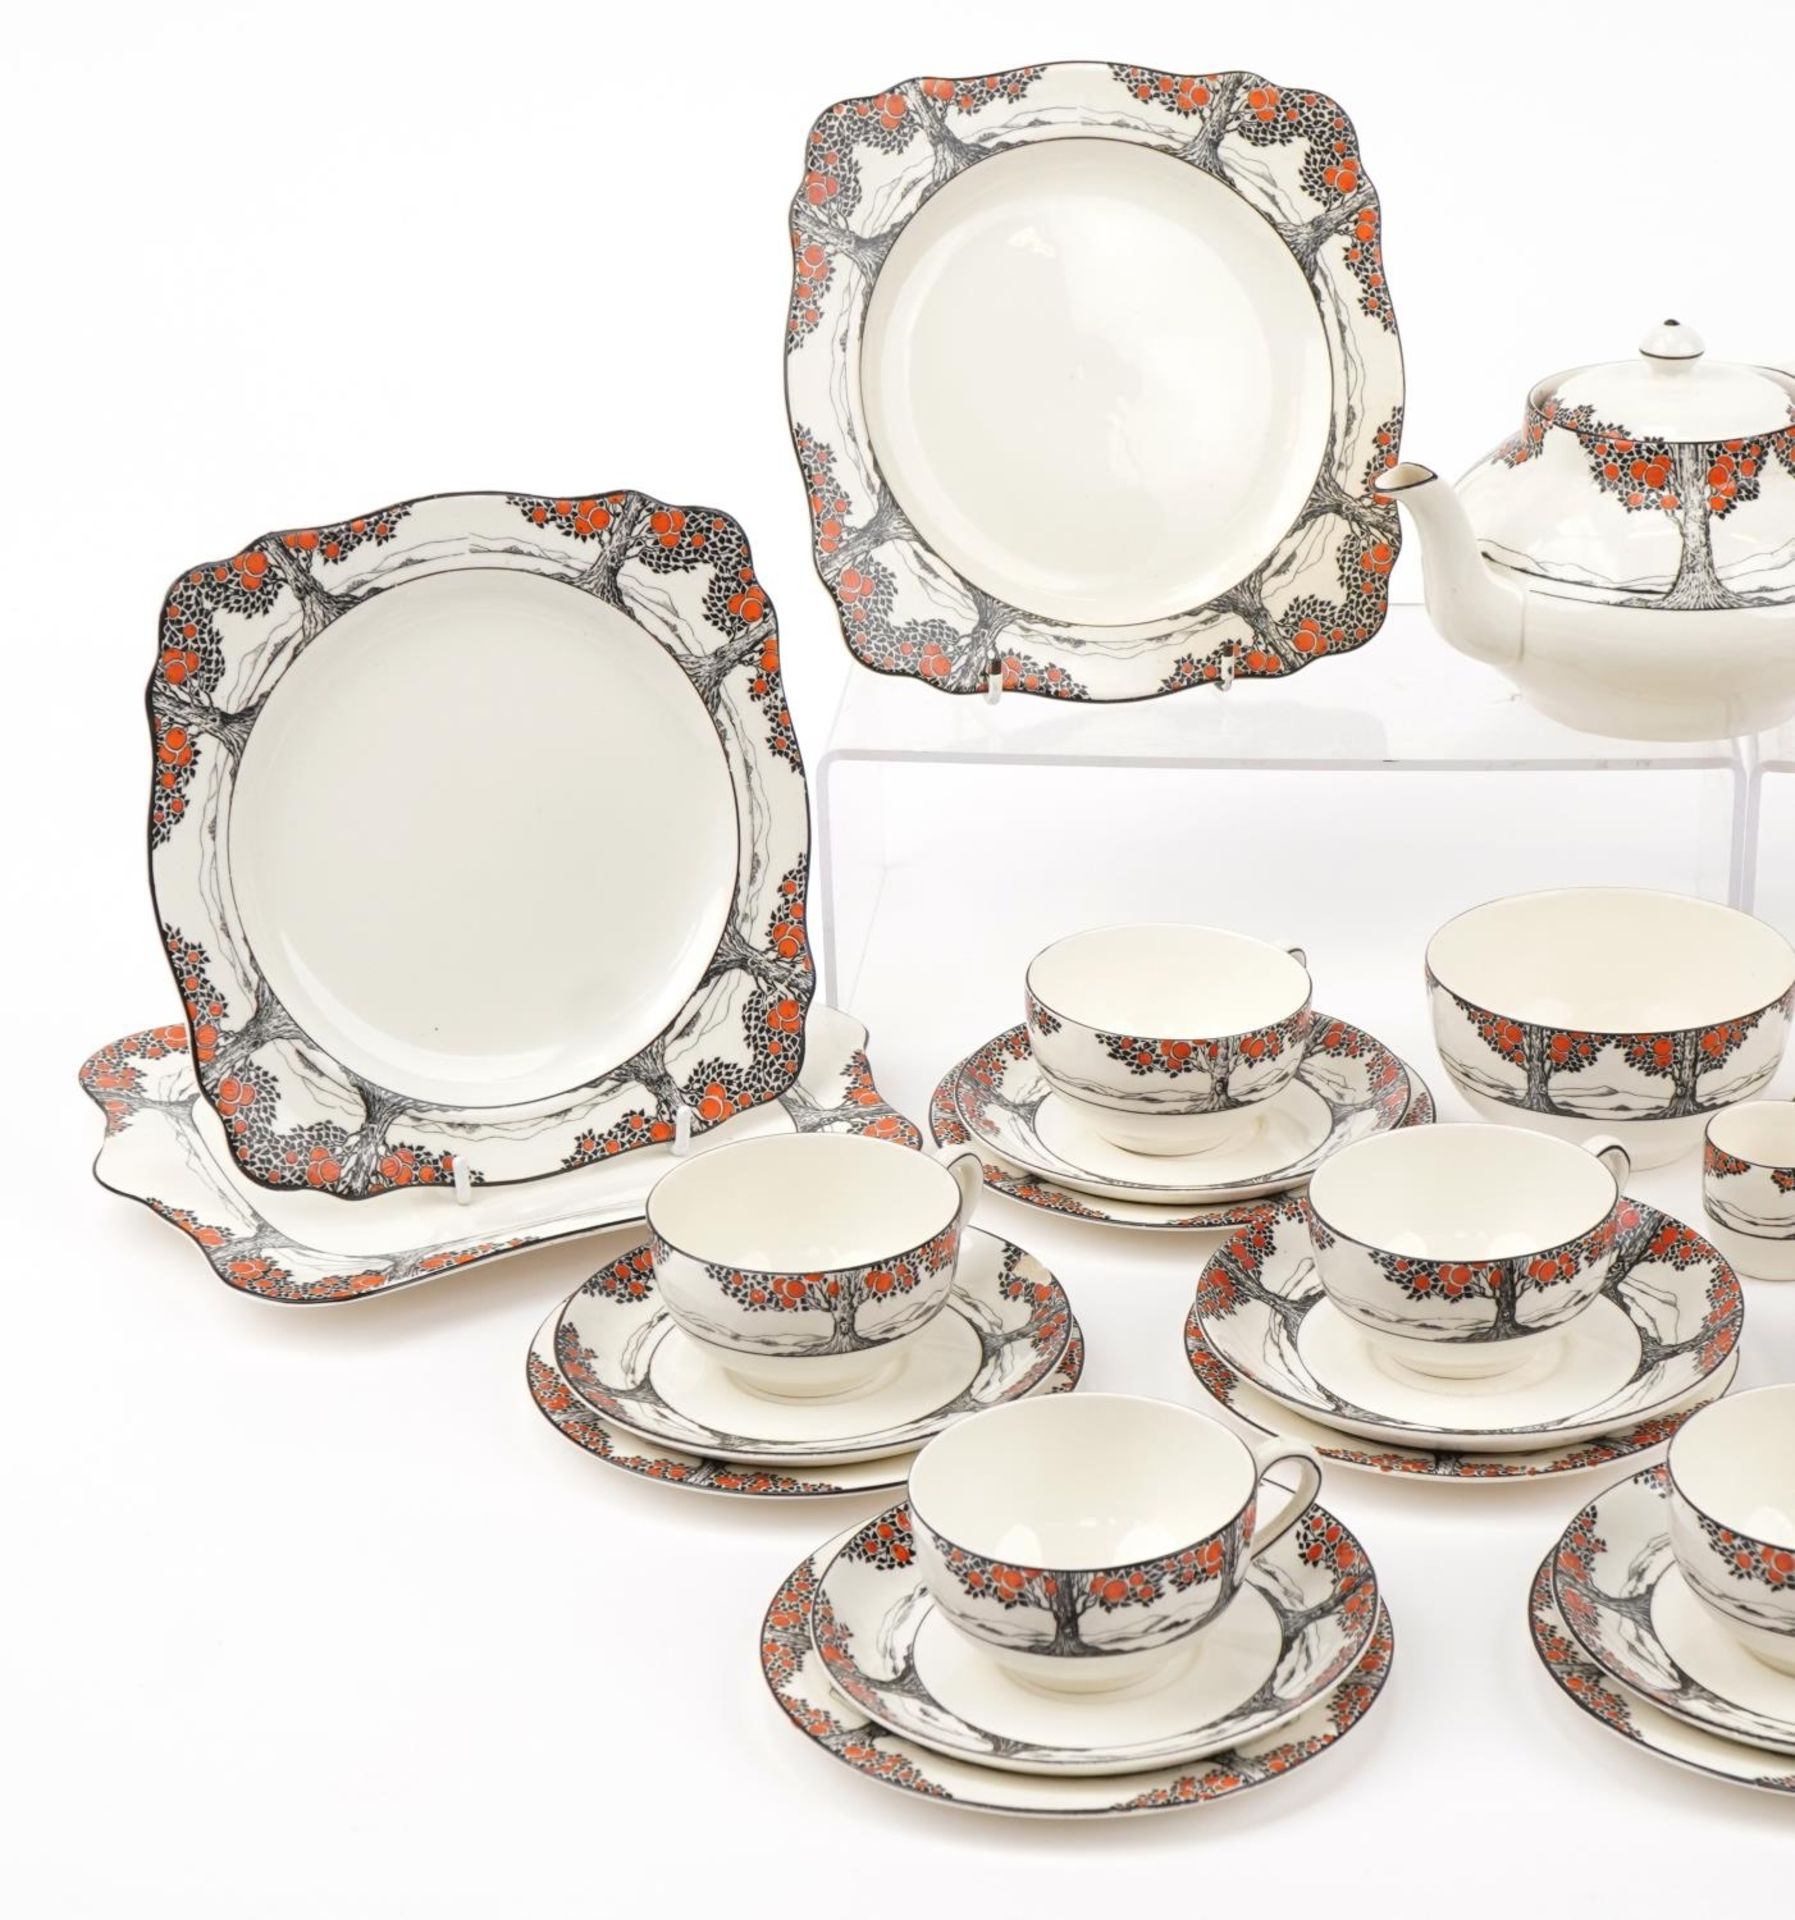 Crown Ducal Orange Tree dinnerware including teapot, cups and saucers, the largest 22.5cm in - Image 2 of 4